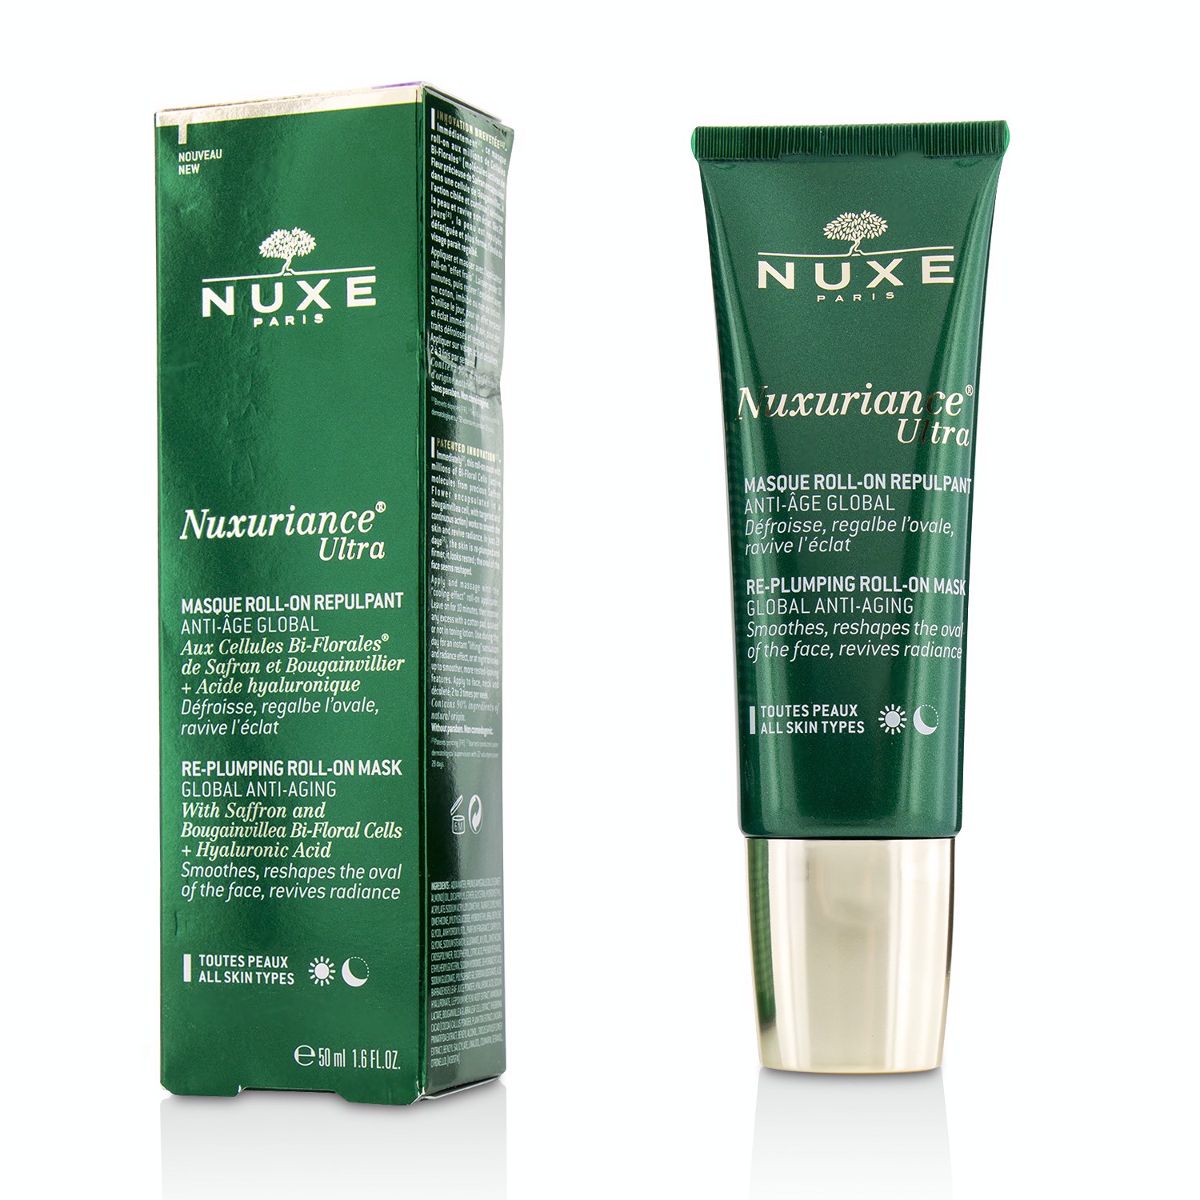 Nuxuriance Ultra Global Anti-Aging Re-Plumping Roll-On Mask - All Skin Types Nuxe Image